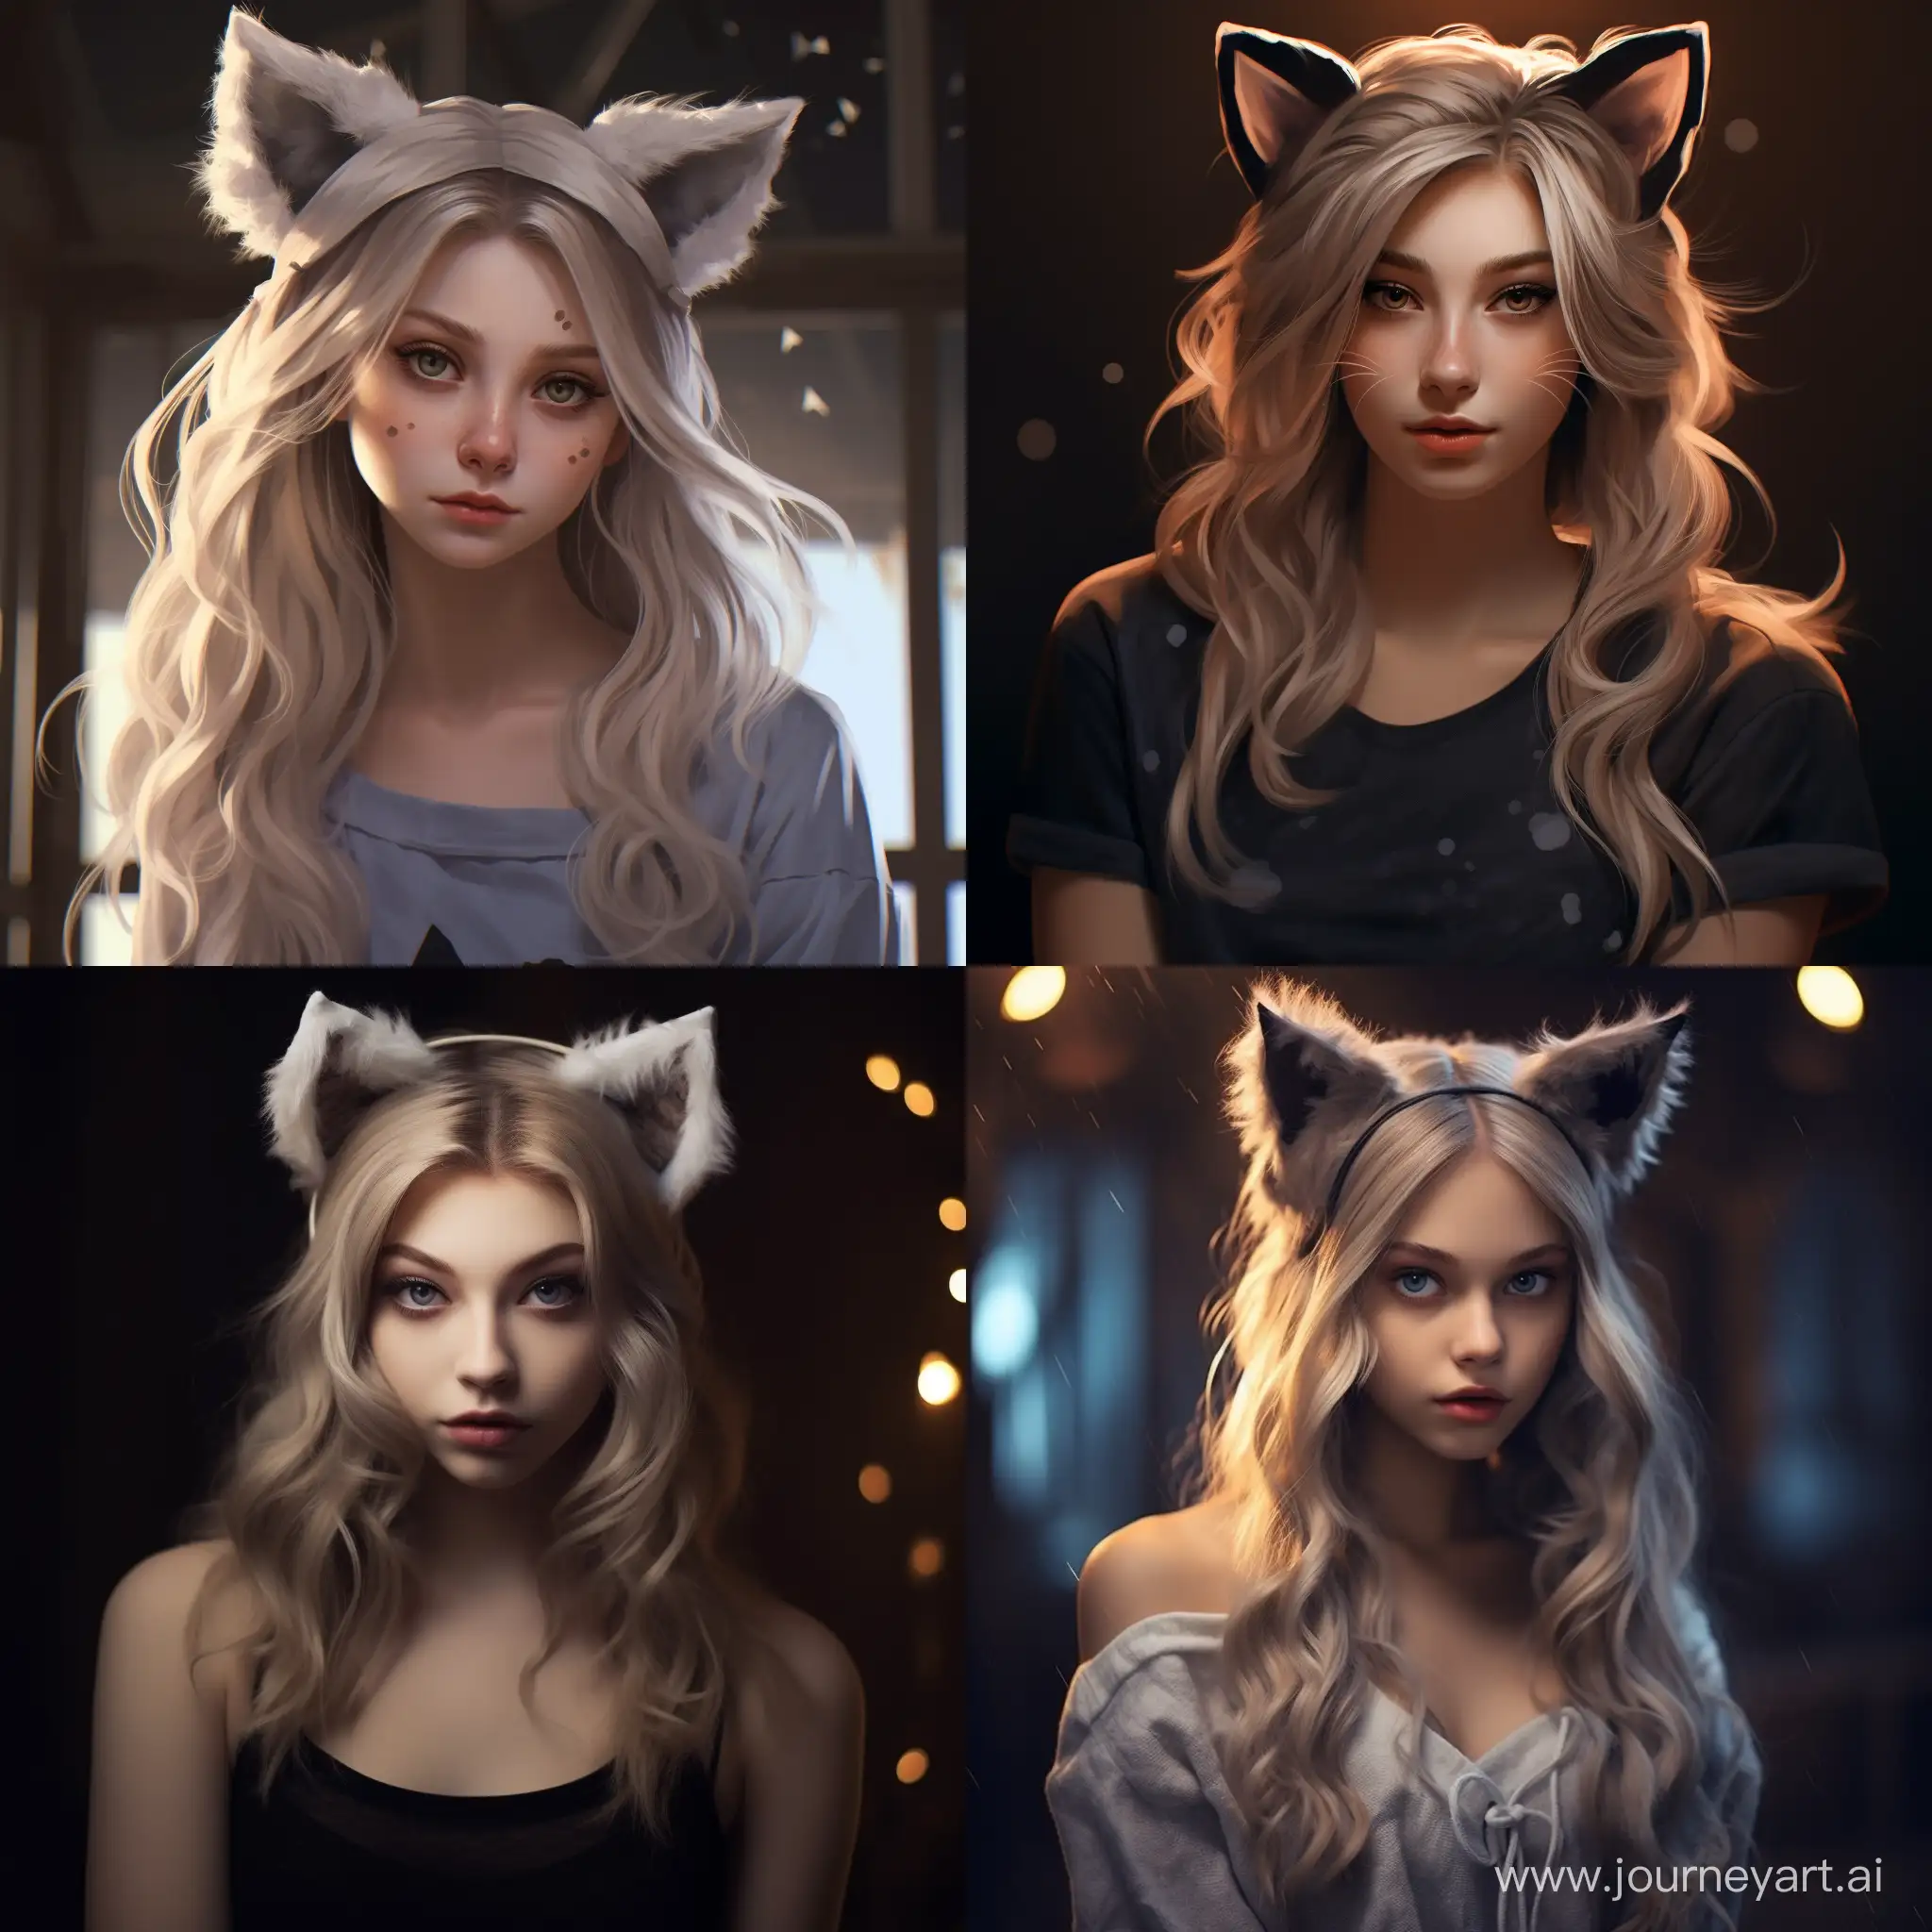 Adorable-Girl-with-Cat-Ears-and-Light-Hair